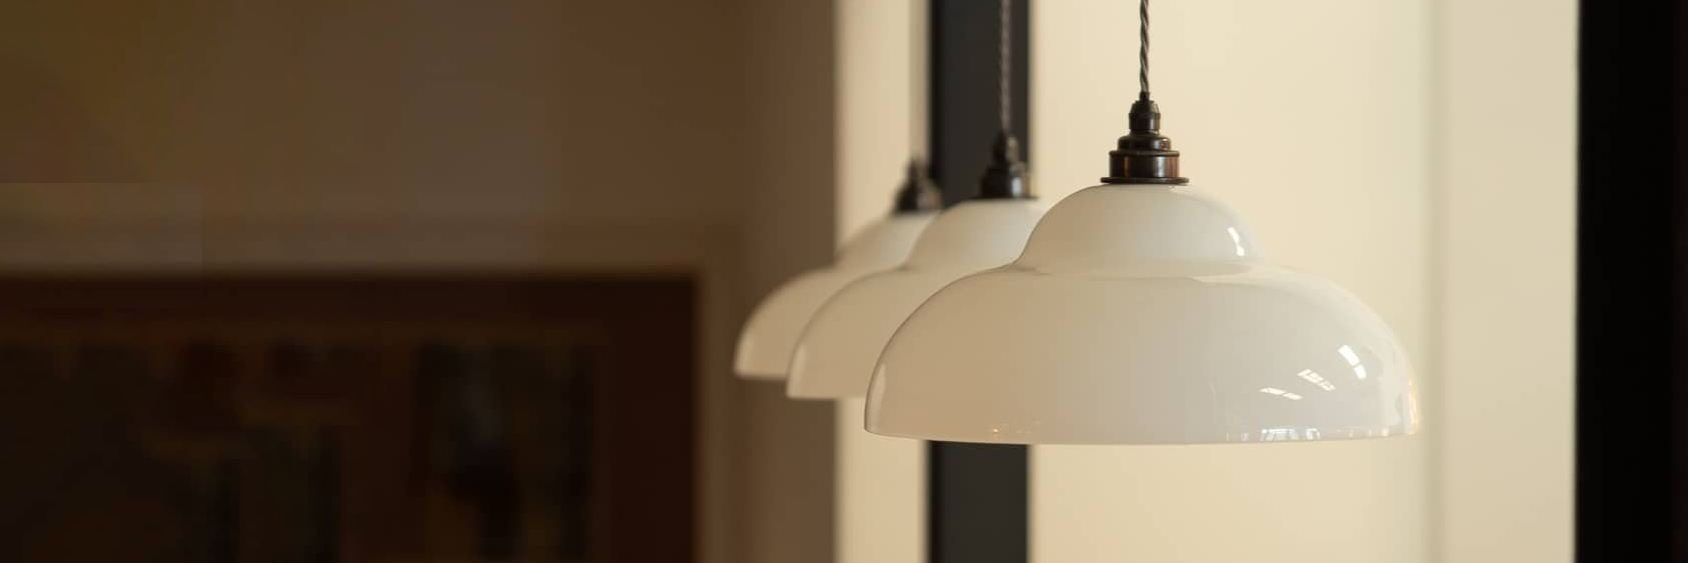 3 Pendant Lights in a Row